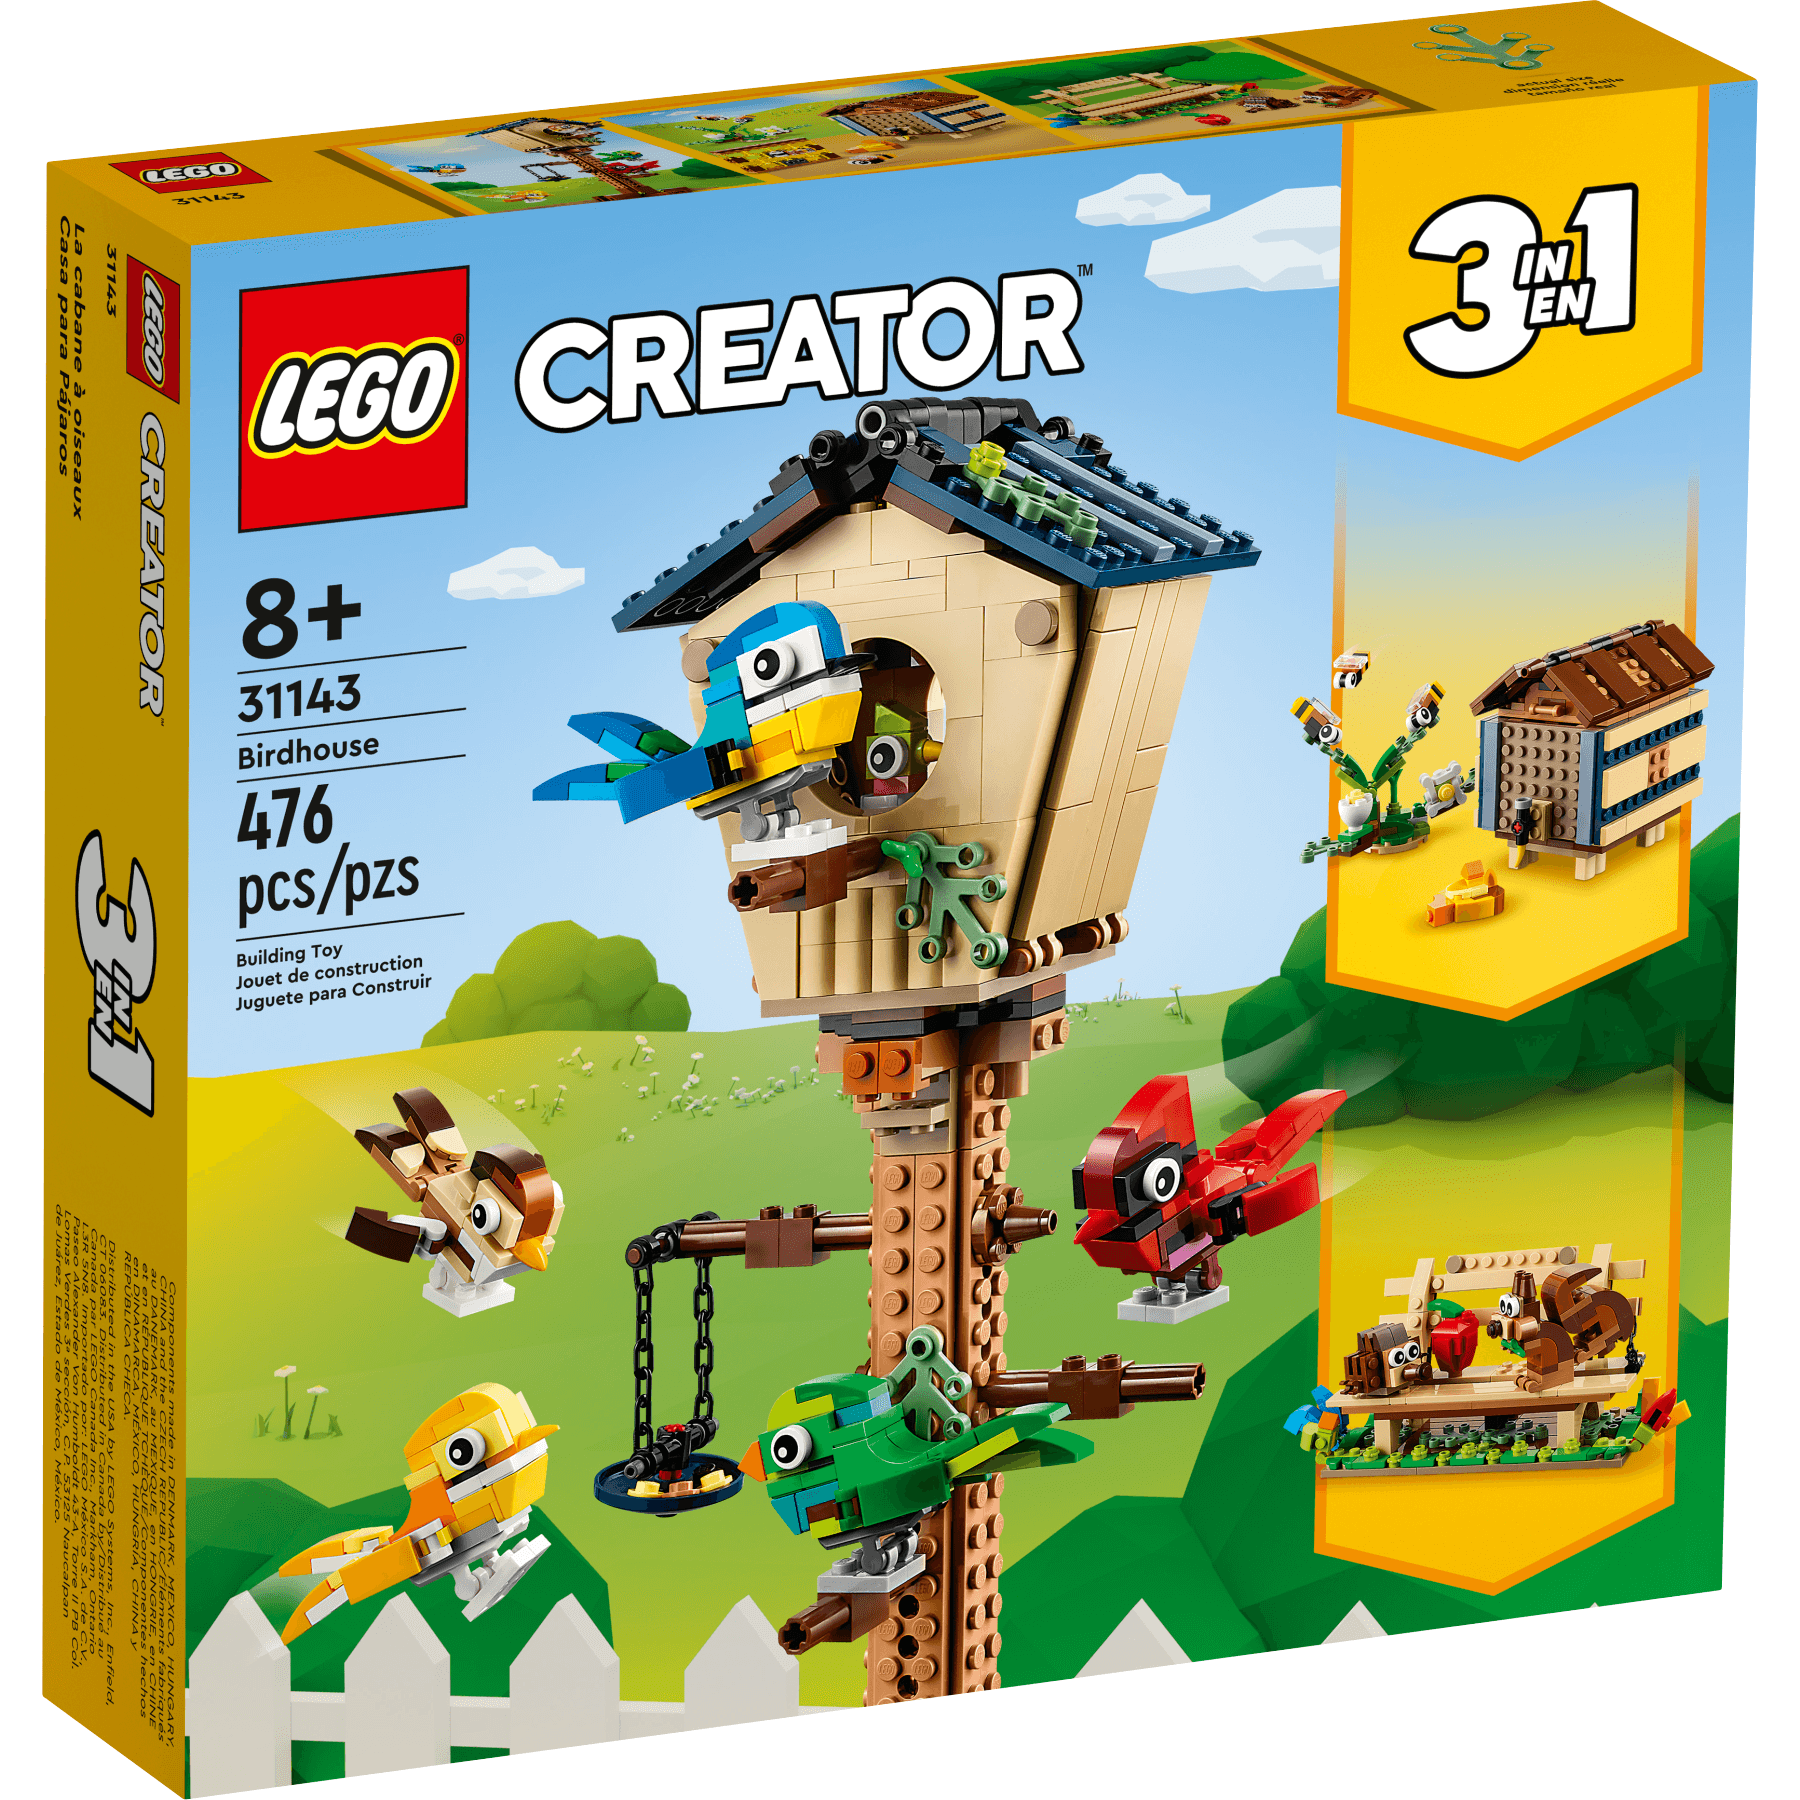 LEGO 31143 Creator 3in1 Birdhouse Building Kit (476 Pieces) - BumbleToys - 5-7 Years, Boys, Creator 3in1, LEGO, OXE, Pre-Order